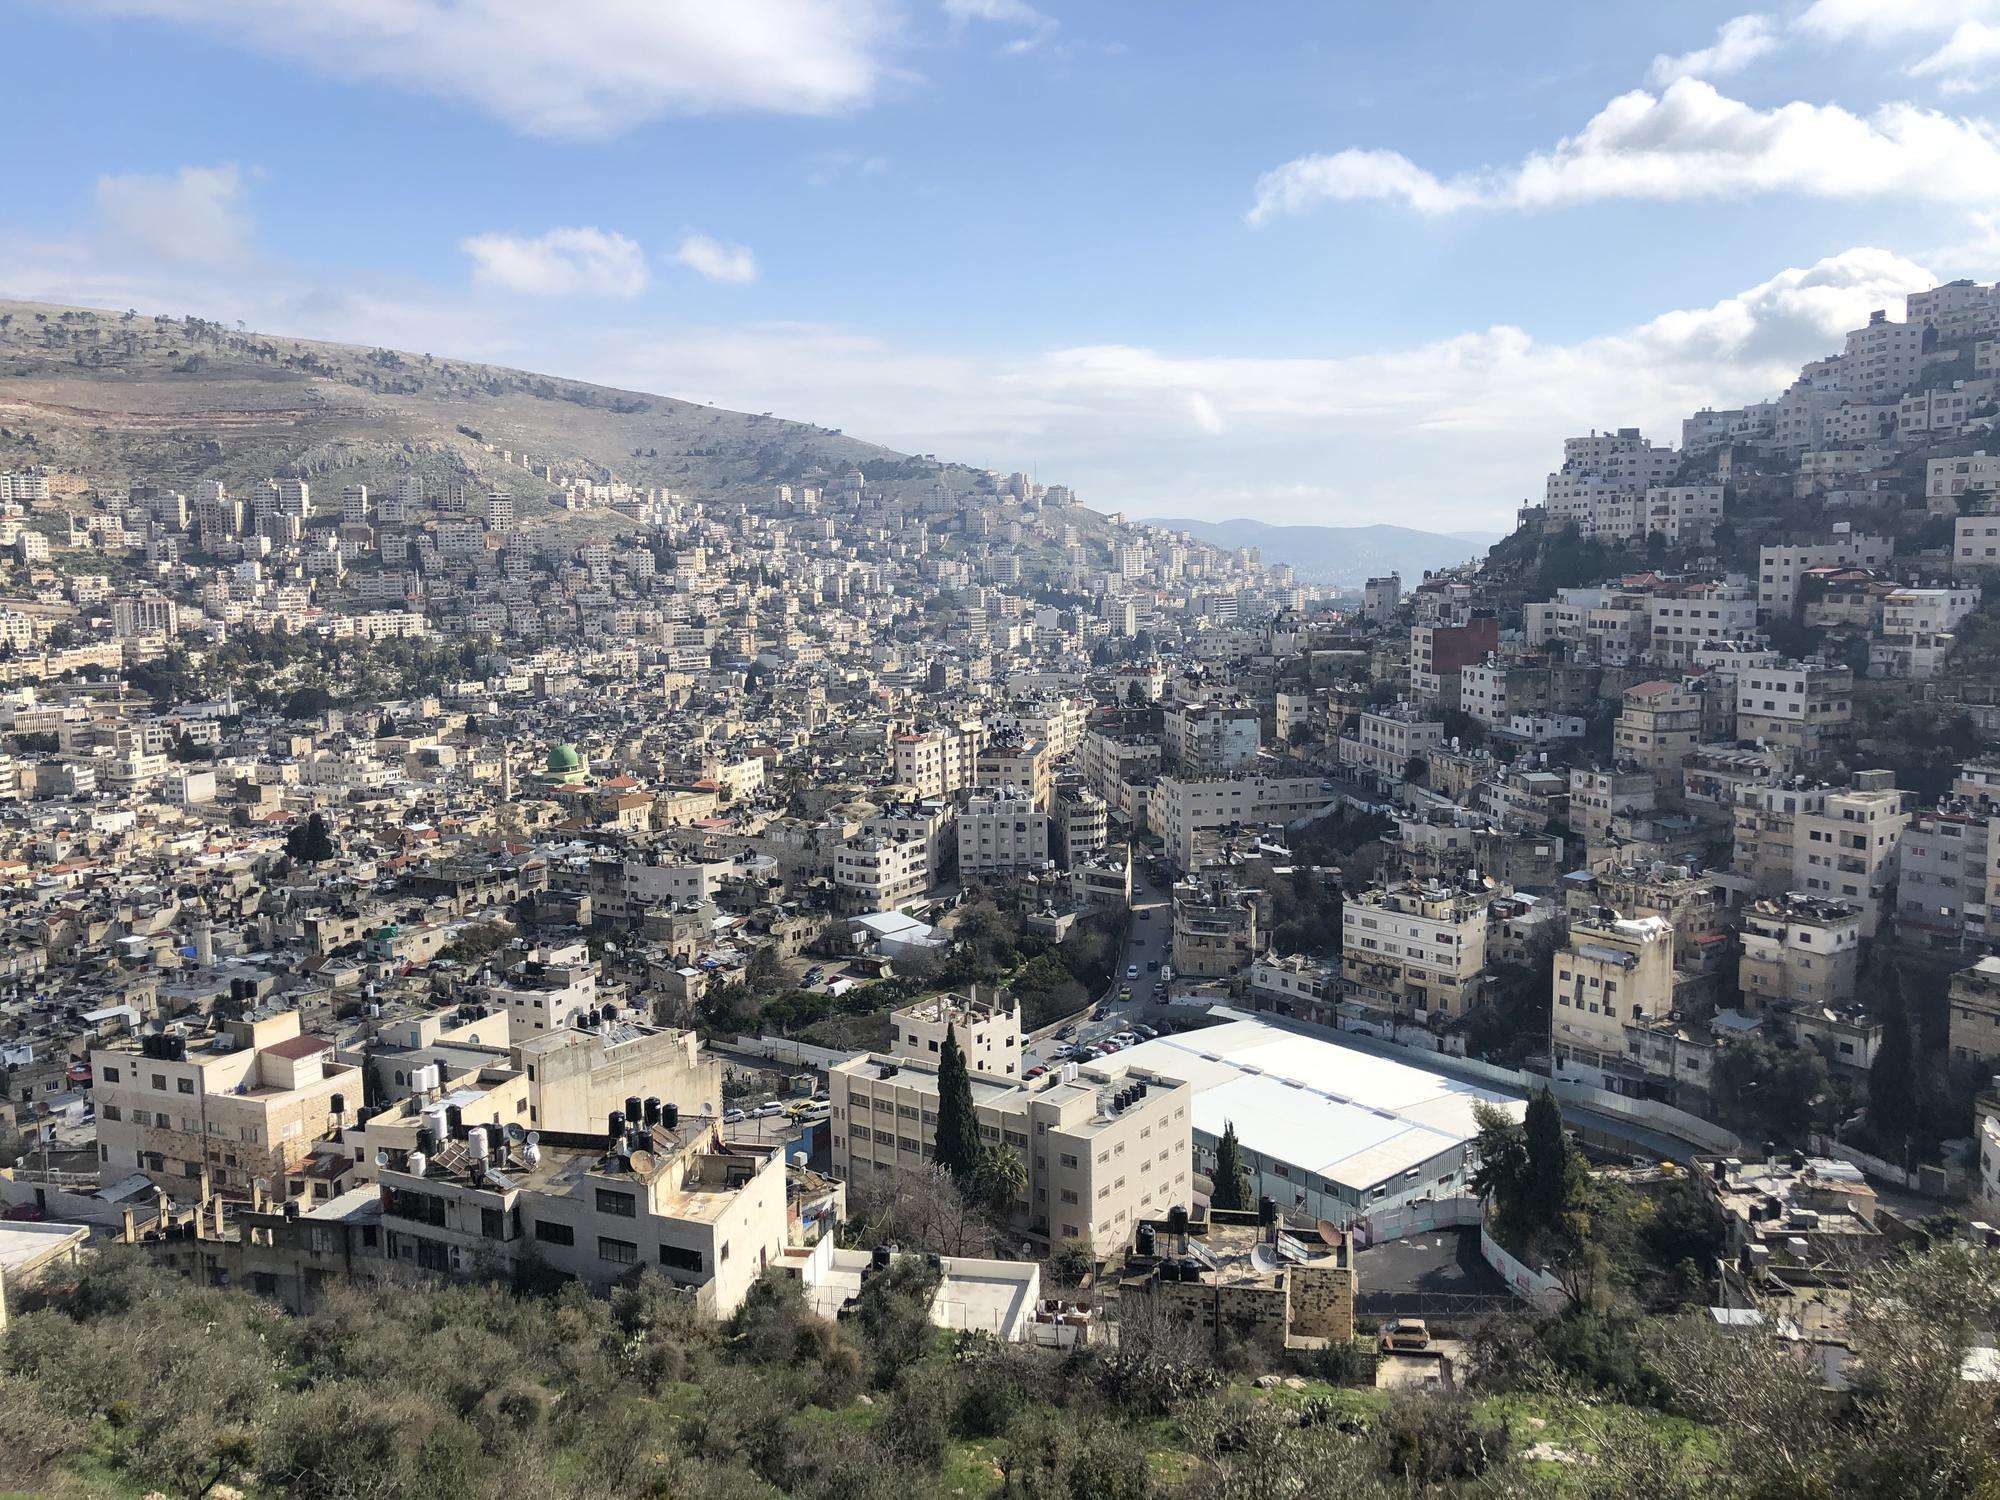 Overview of Nablus, West Bank